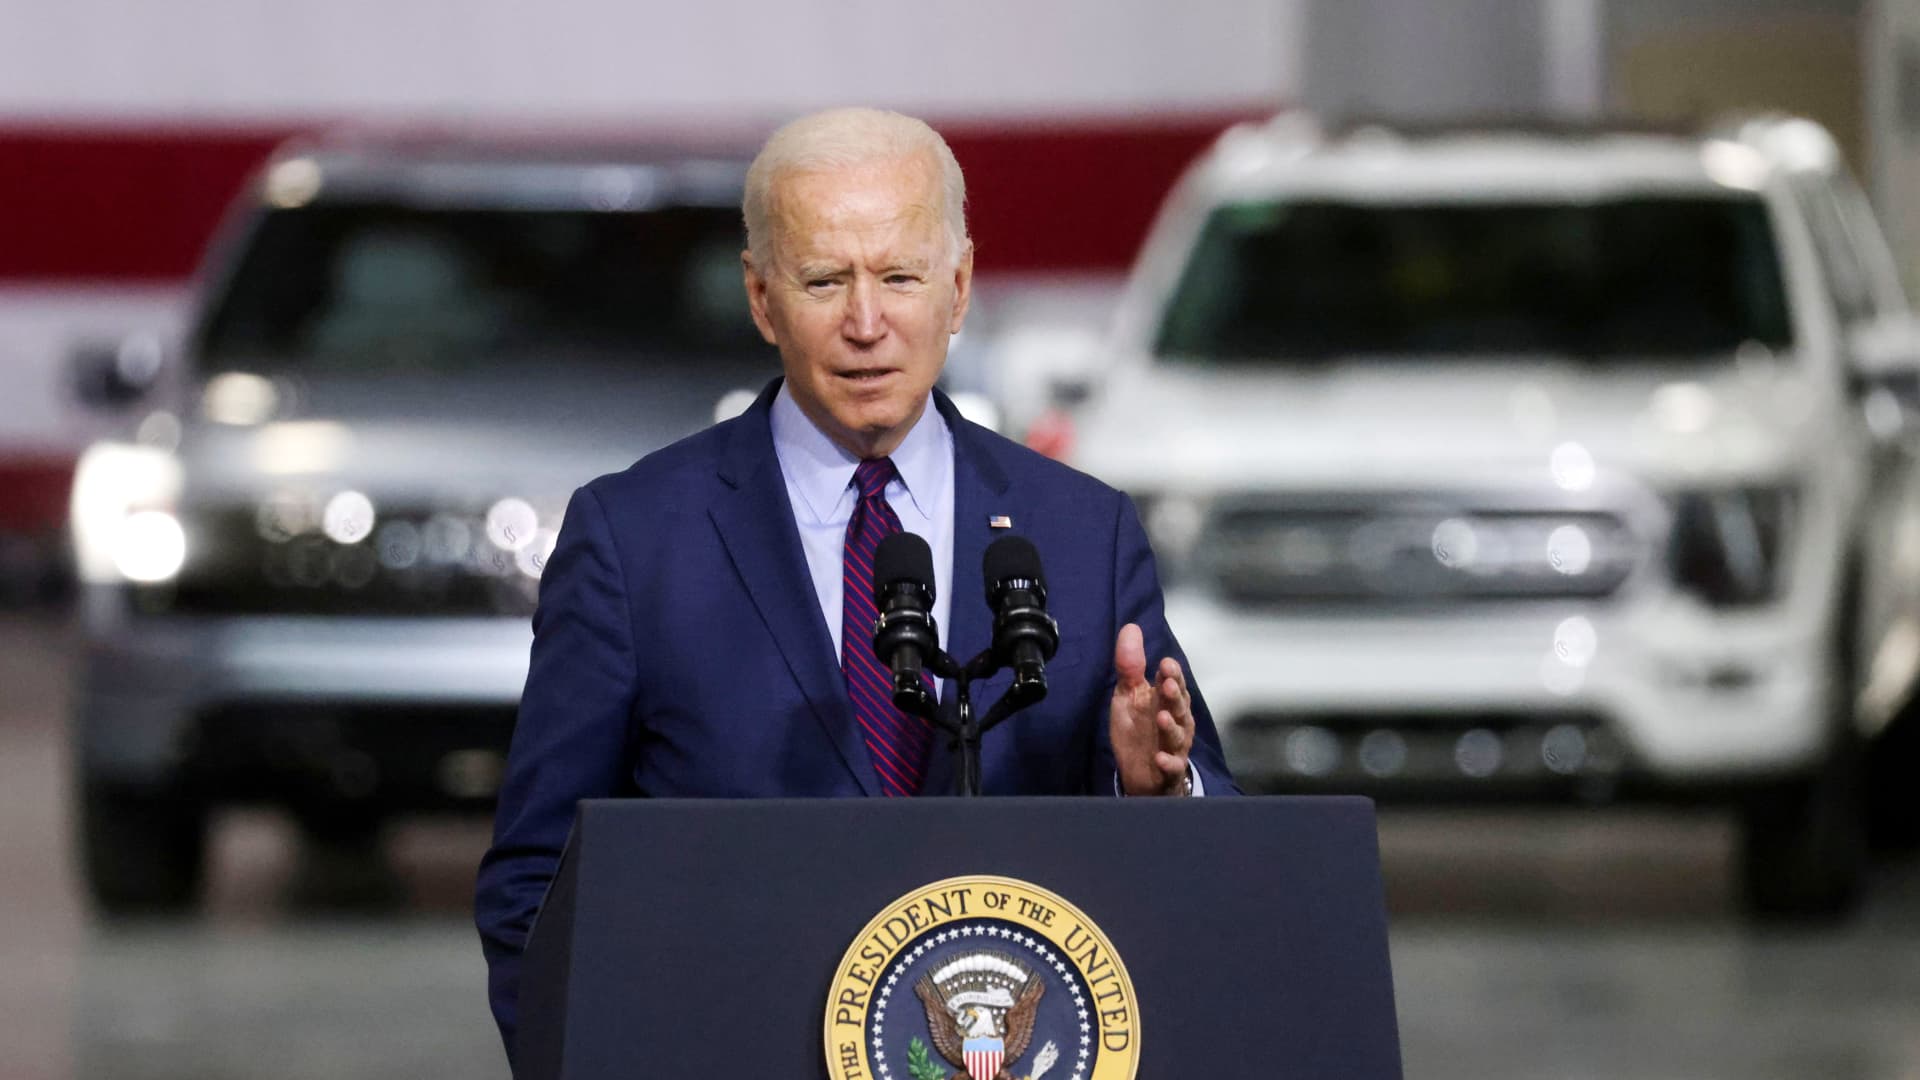 Biden digs at Tesla CEO Elon Musk on economic system, touts Ford